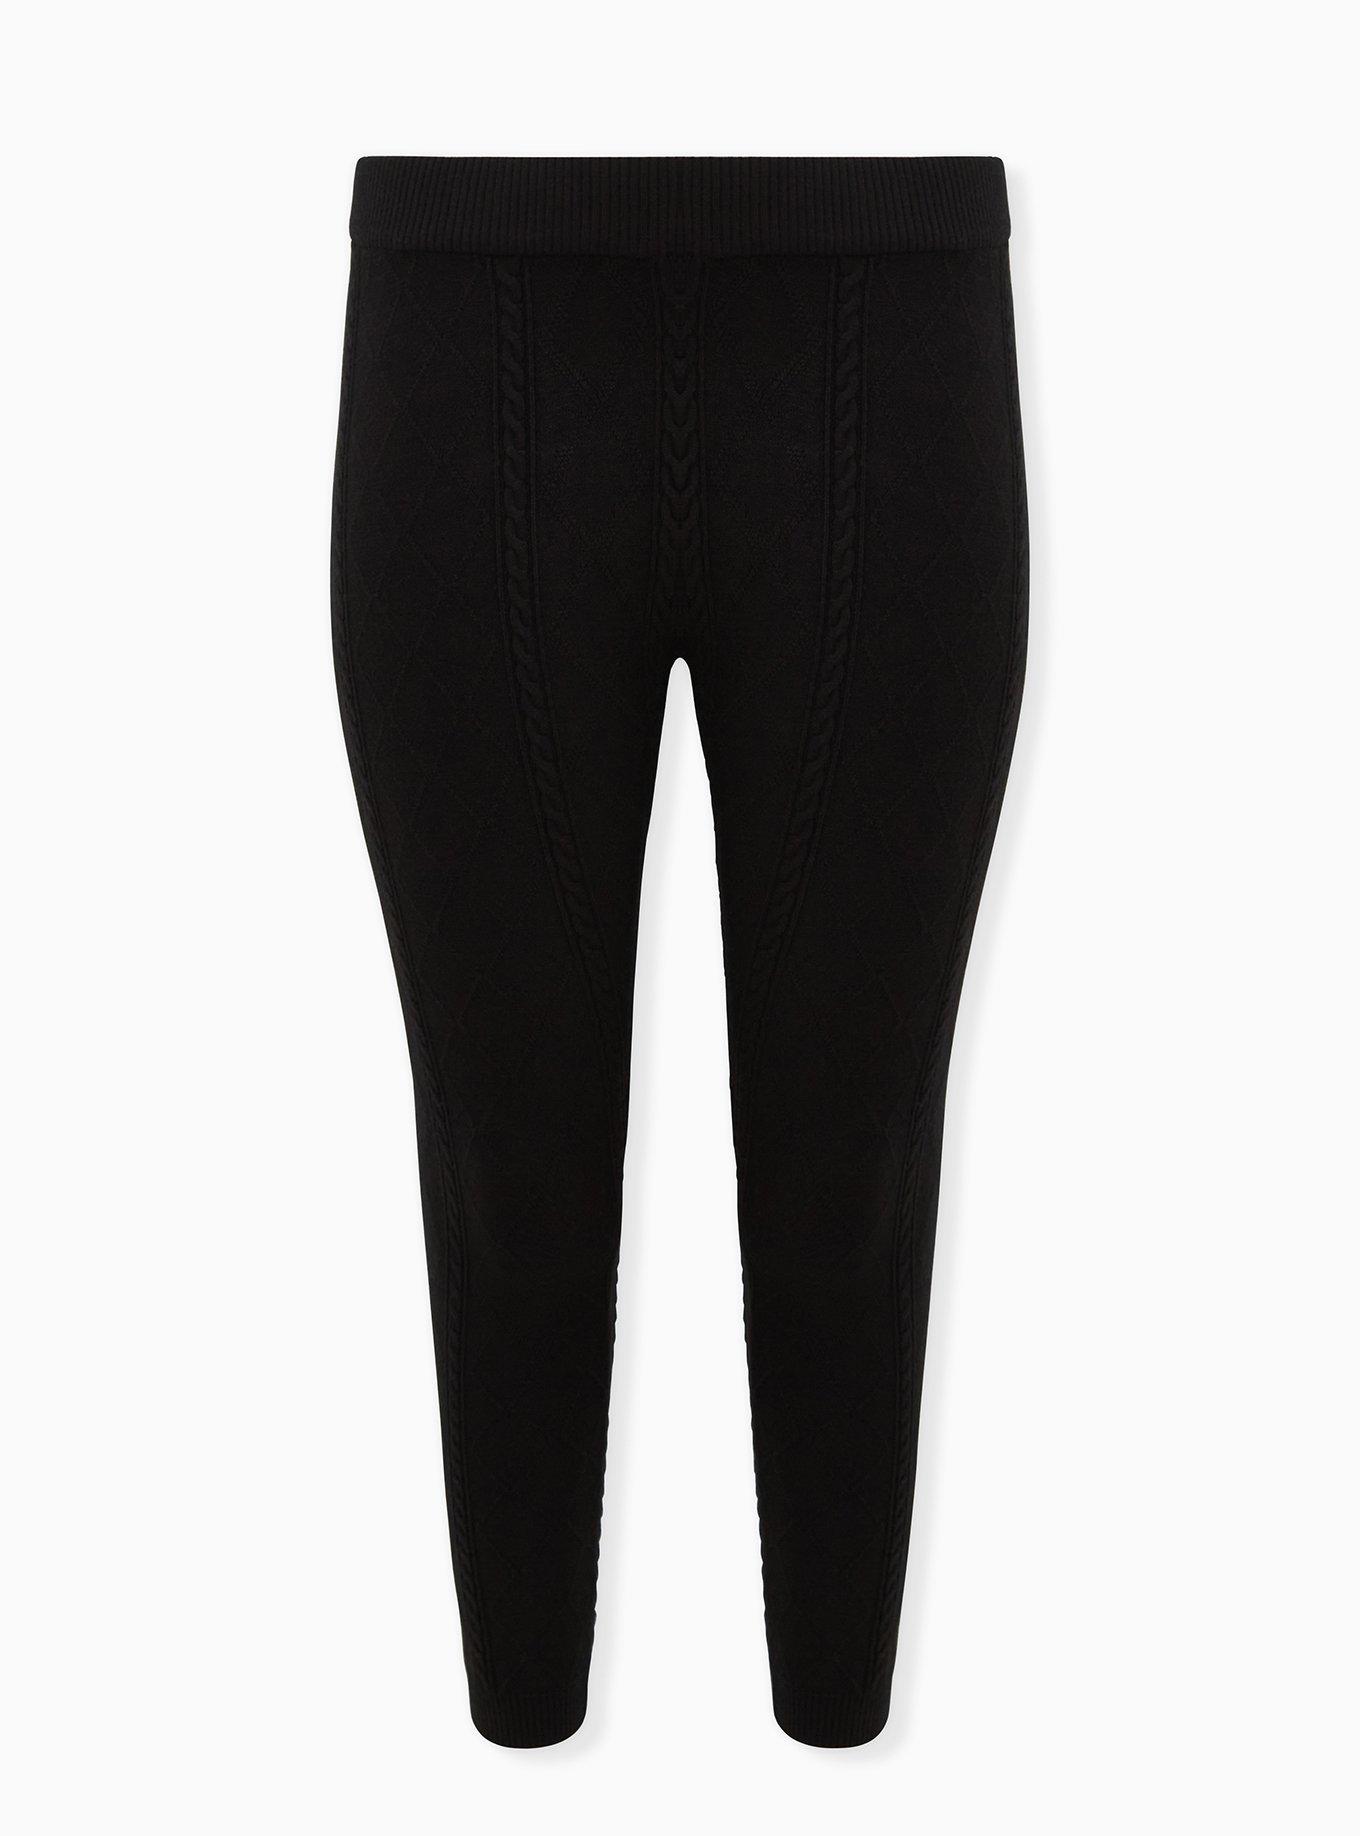 Cable Knit High Waist Leggings